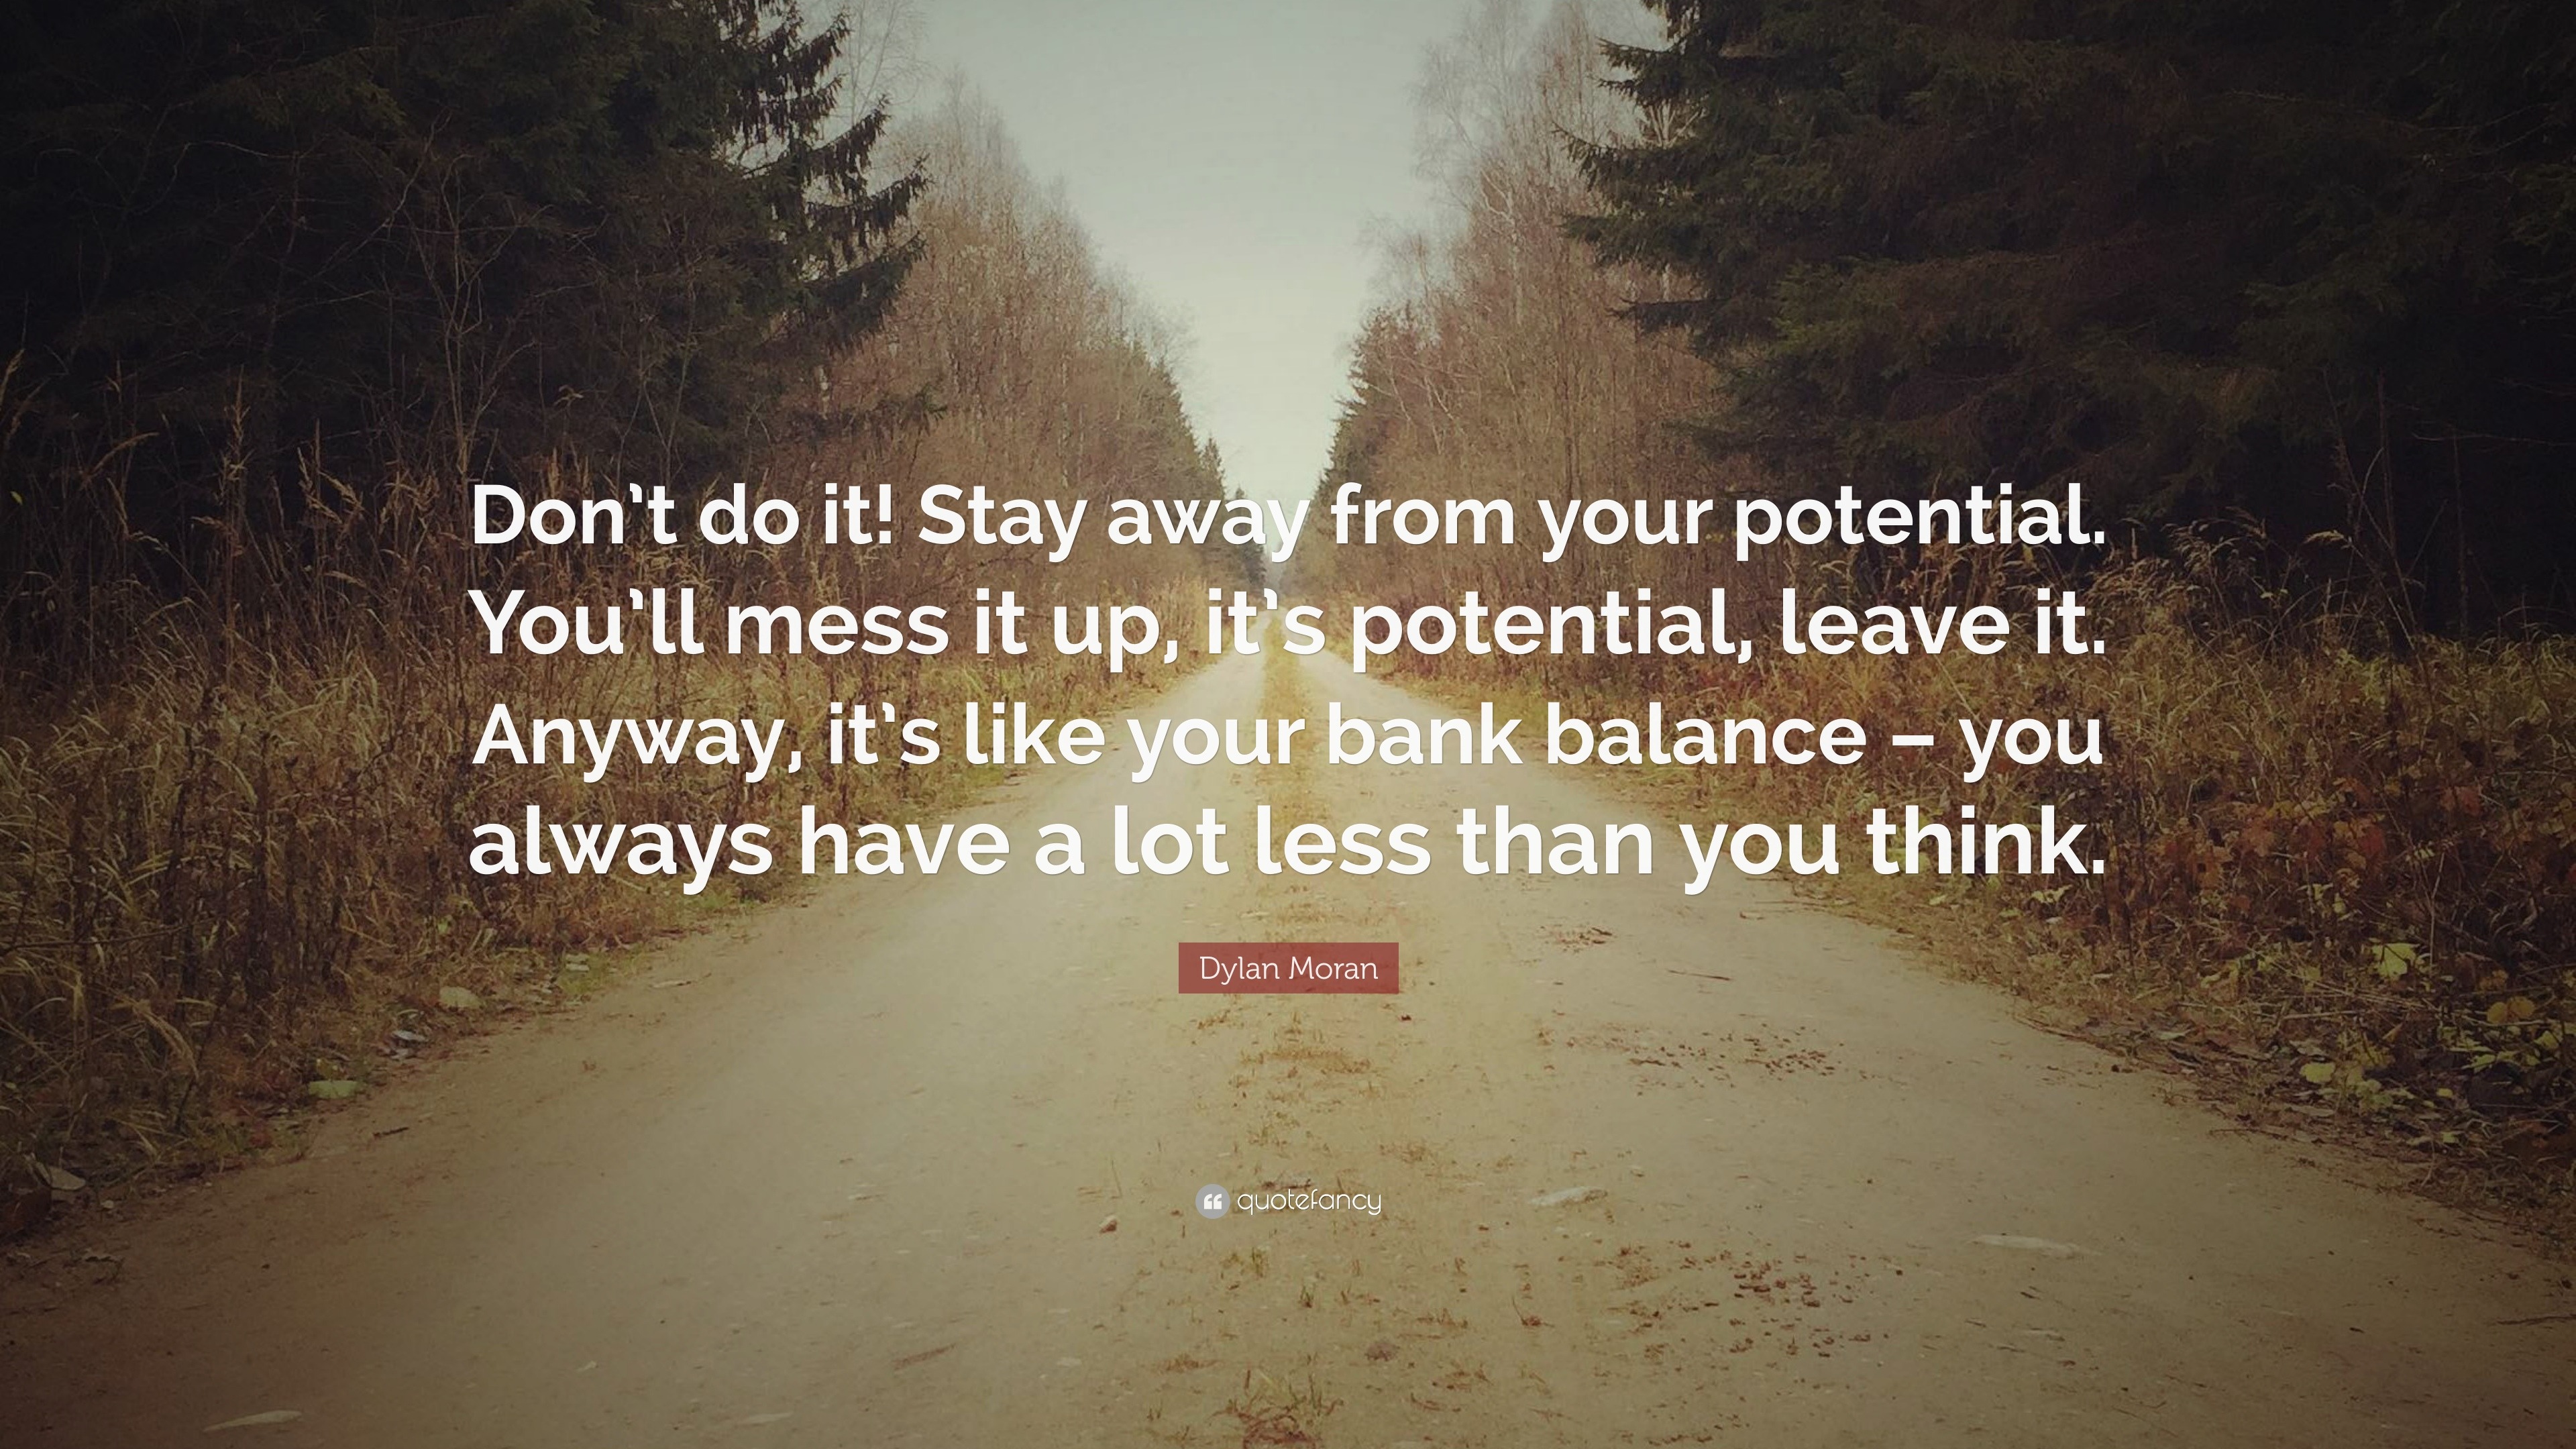 Dylan Moran Quote: “Don’t do it! Stay away from your potential. You’ll